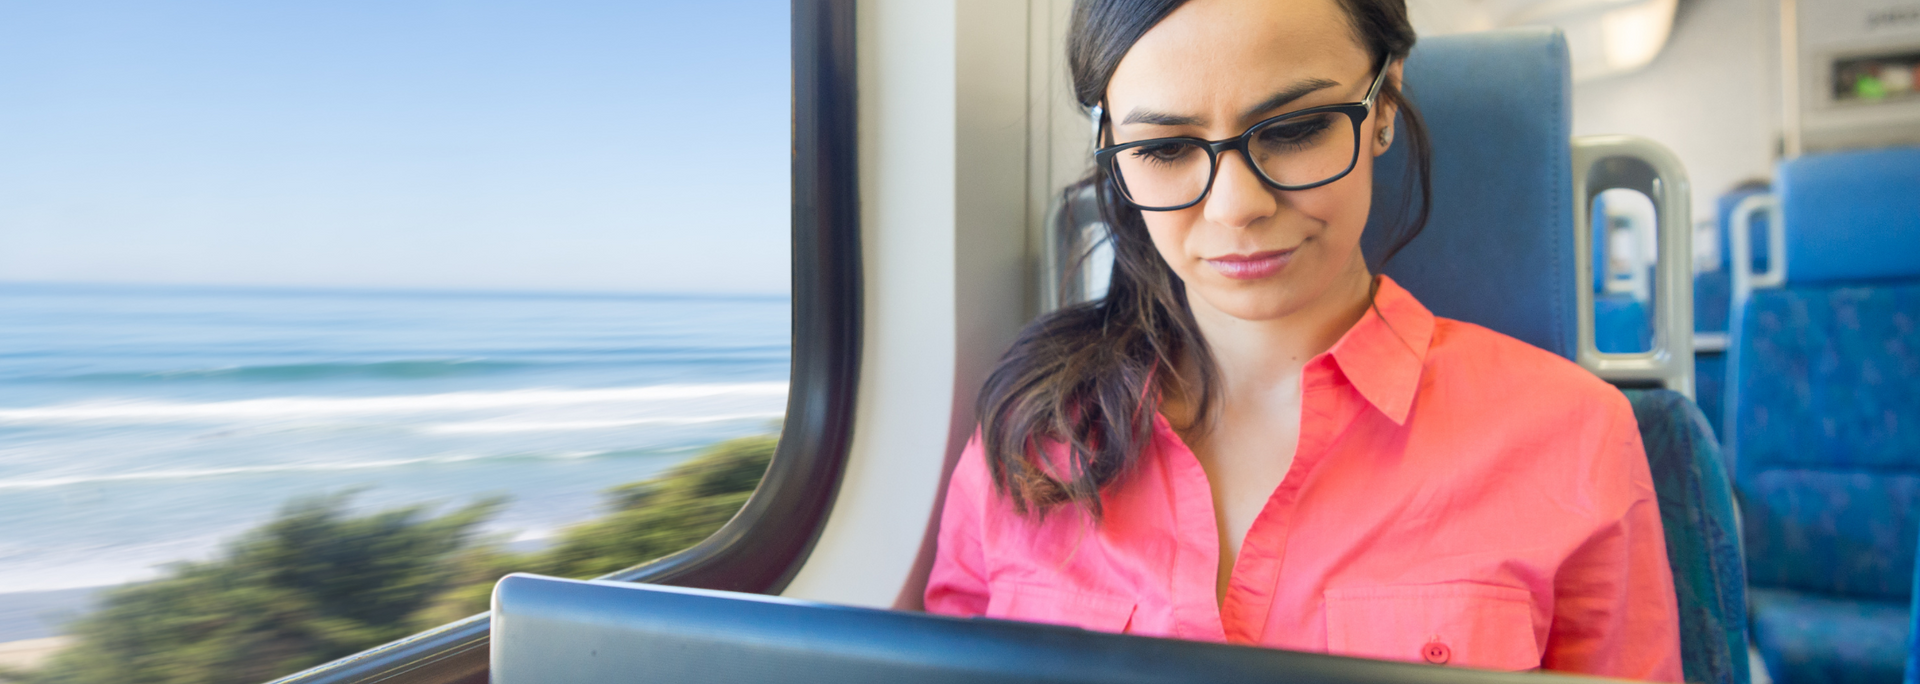 A woman is sitting on a train using a laptop computer.